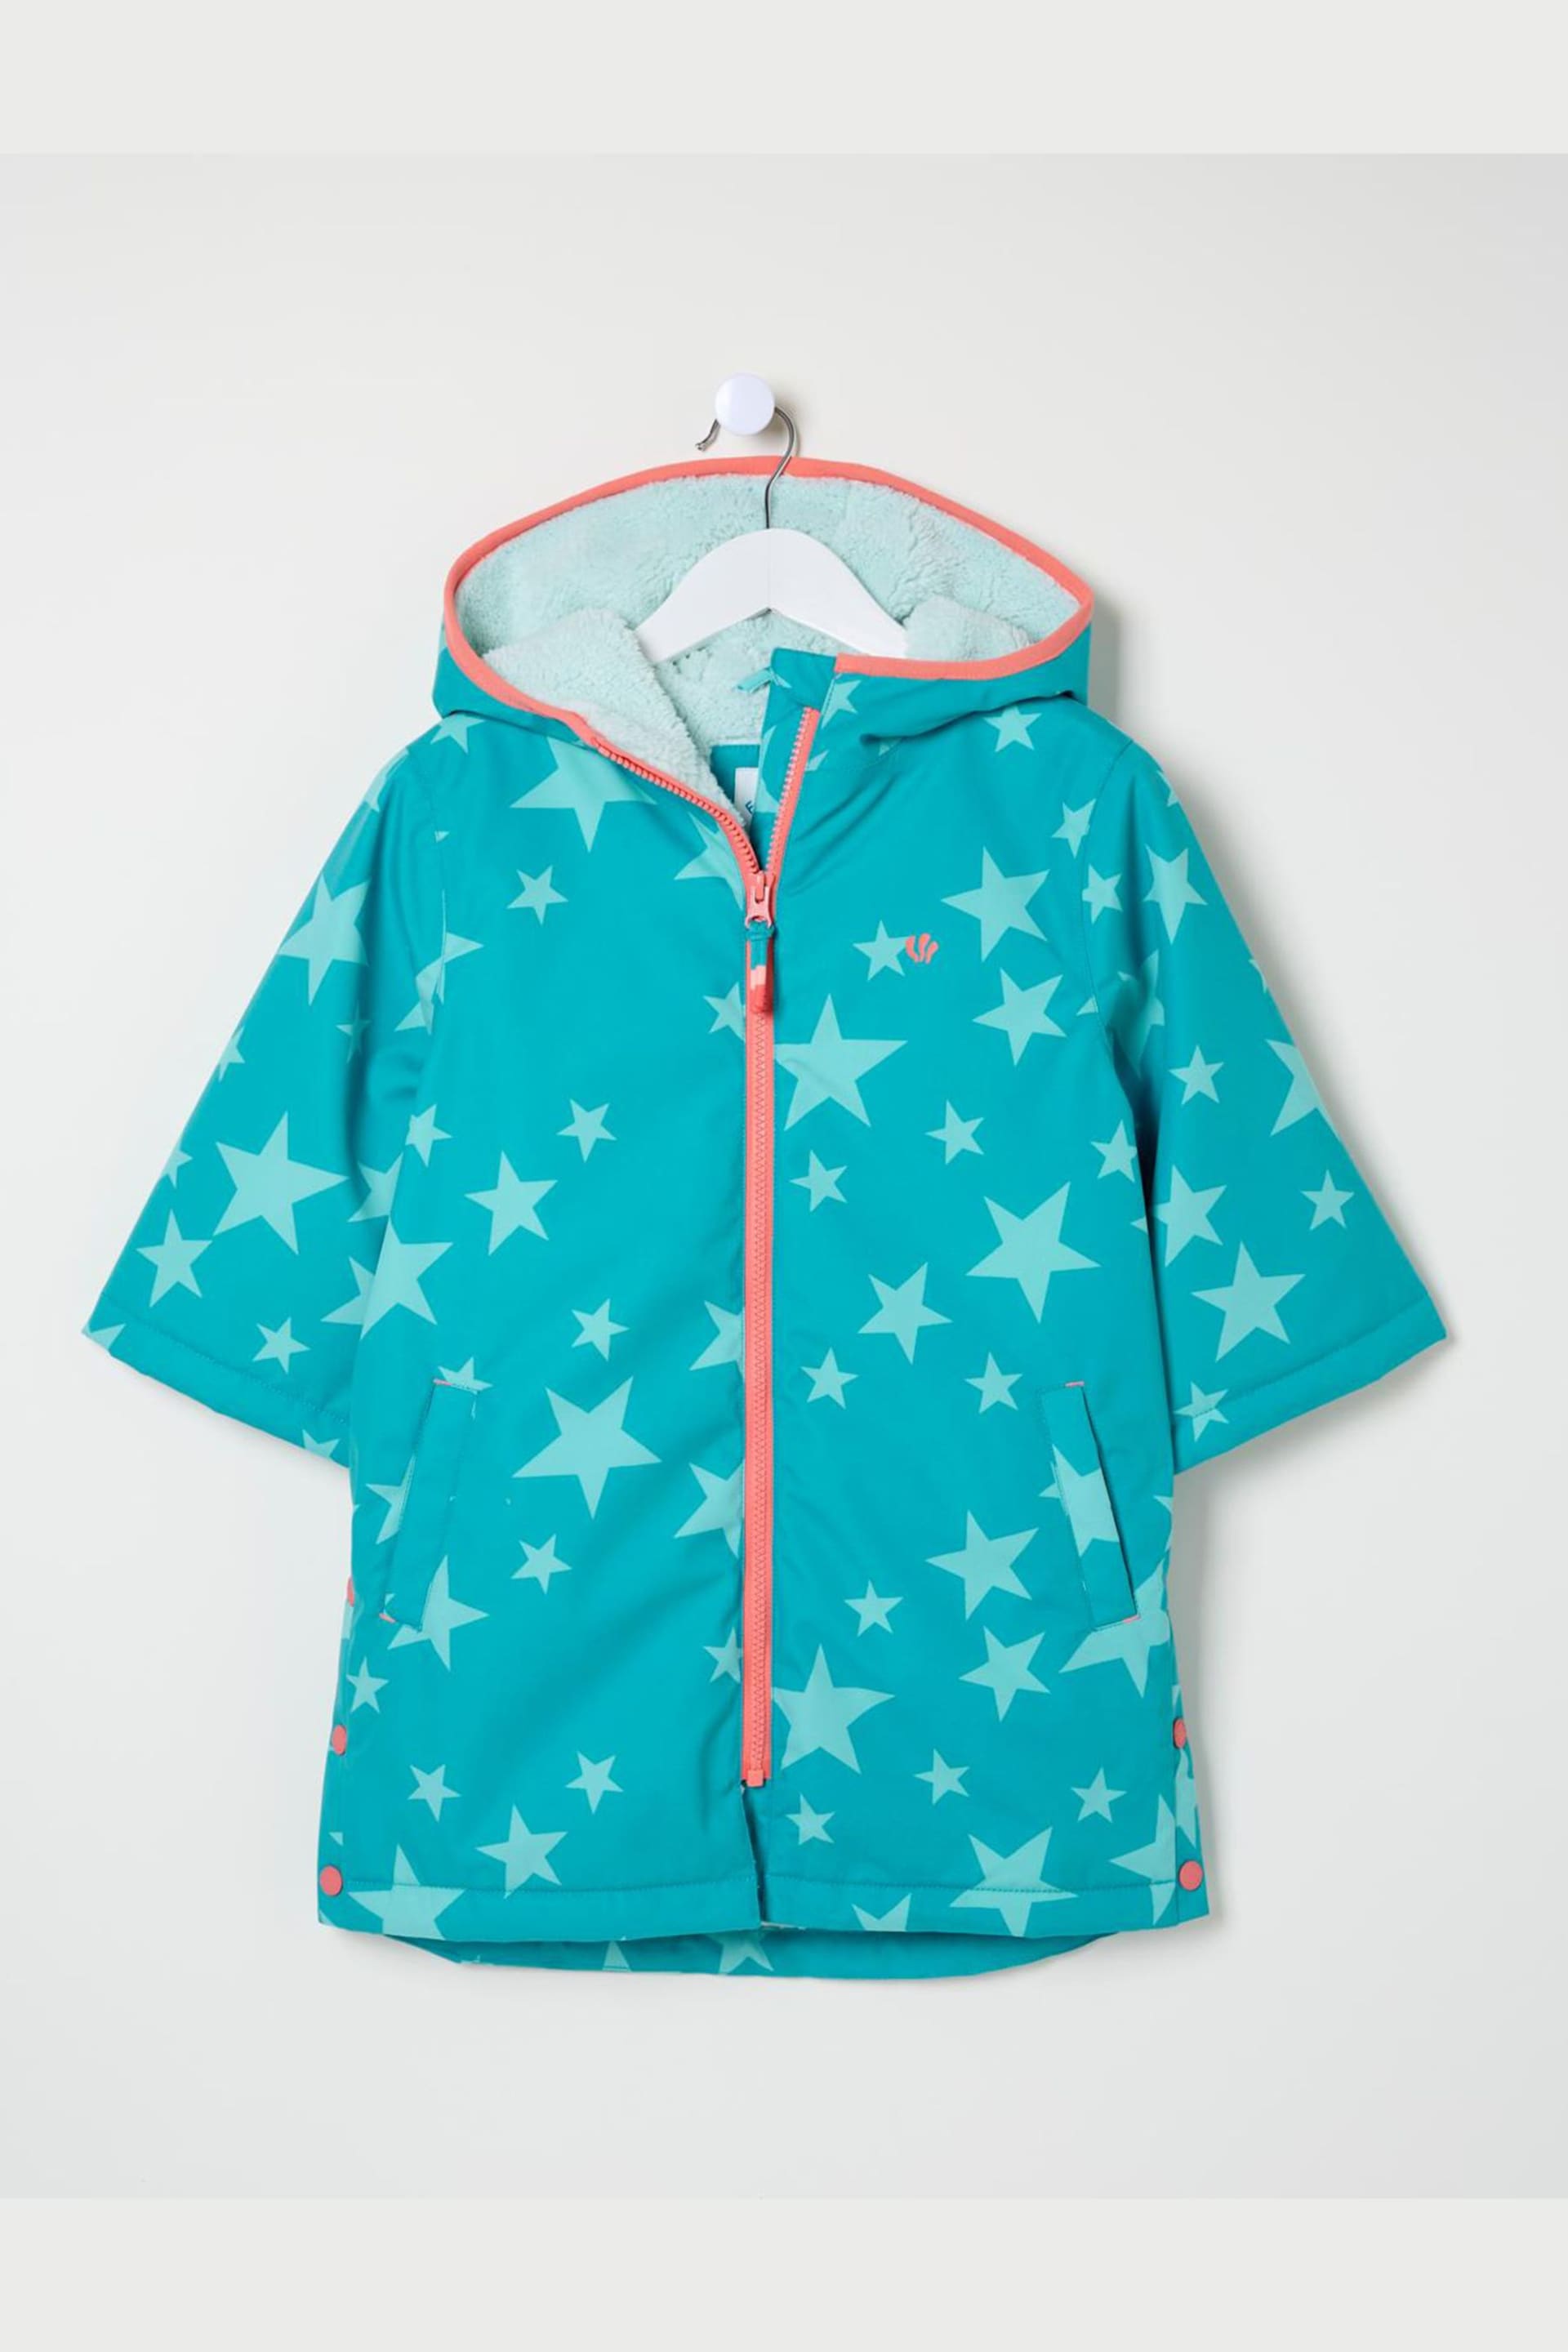 FatFace Blue Waterproof Changing Robe - Image 6 of 6